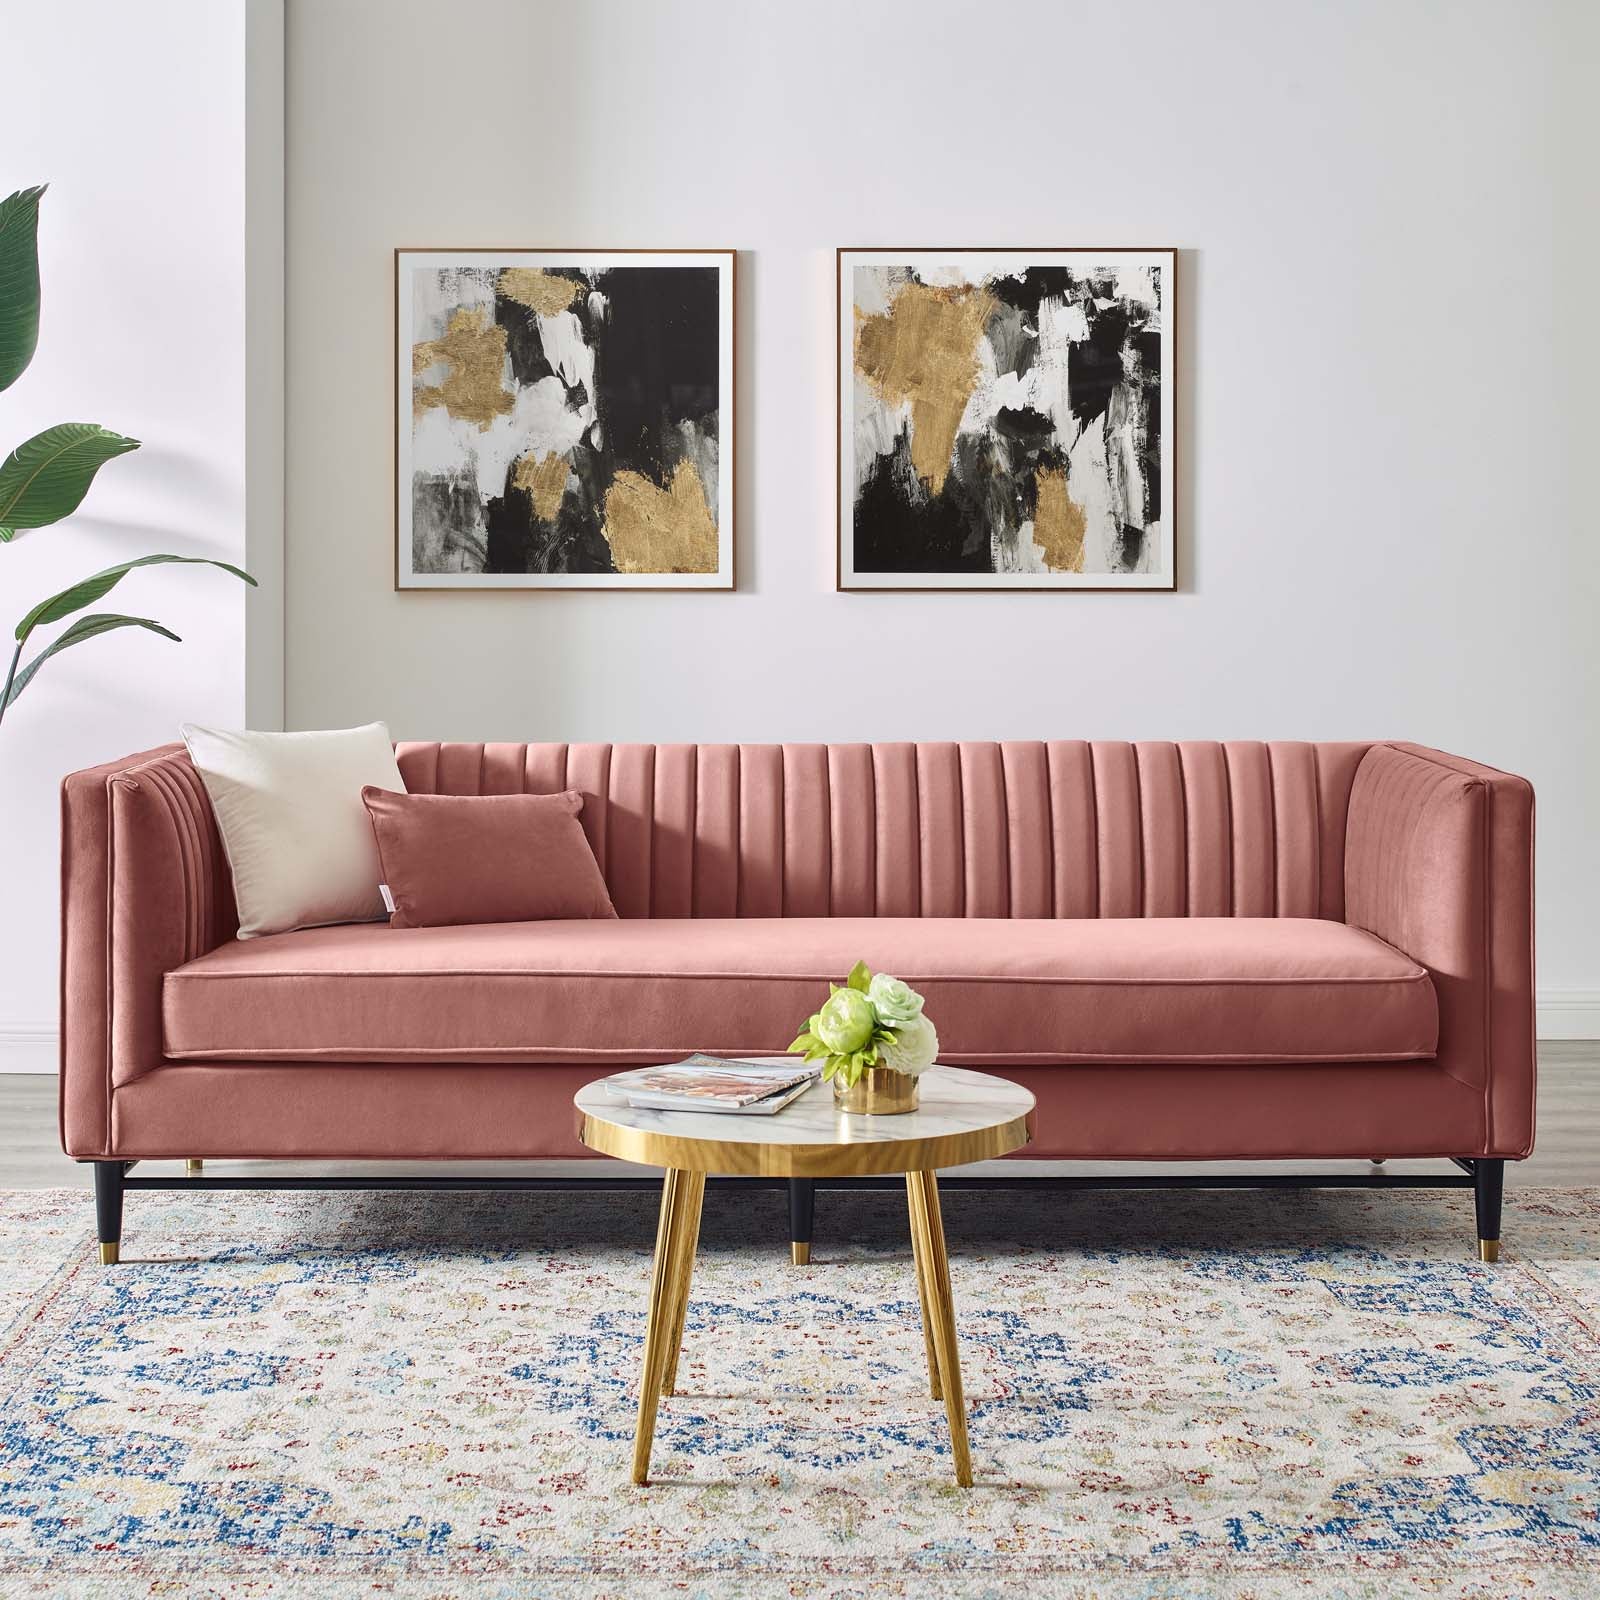 Modway Sofas & Couches - Devote Channel Tufted Performance Velvet Sofa Dusty Rose